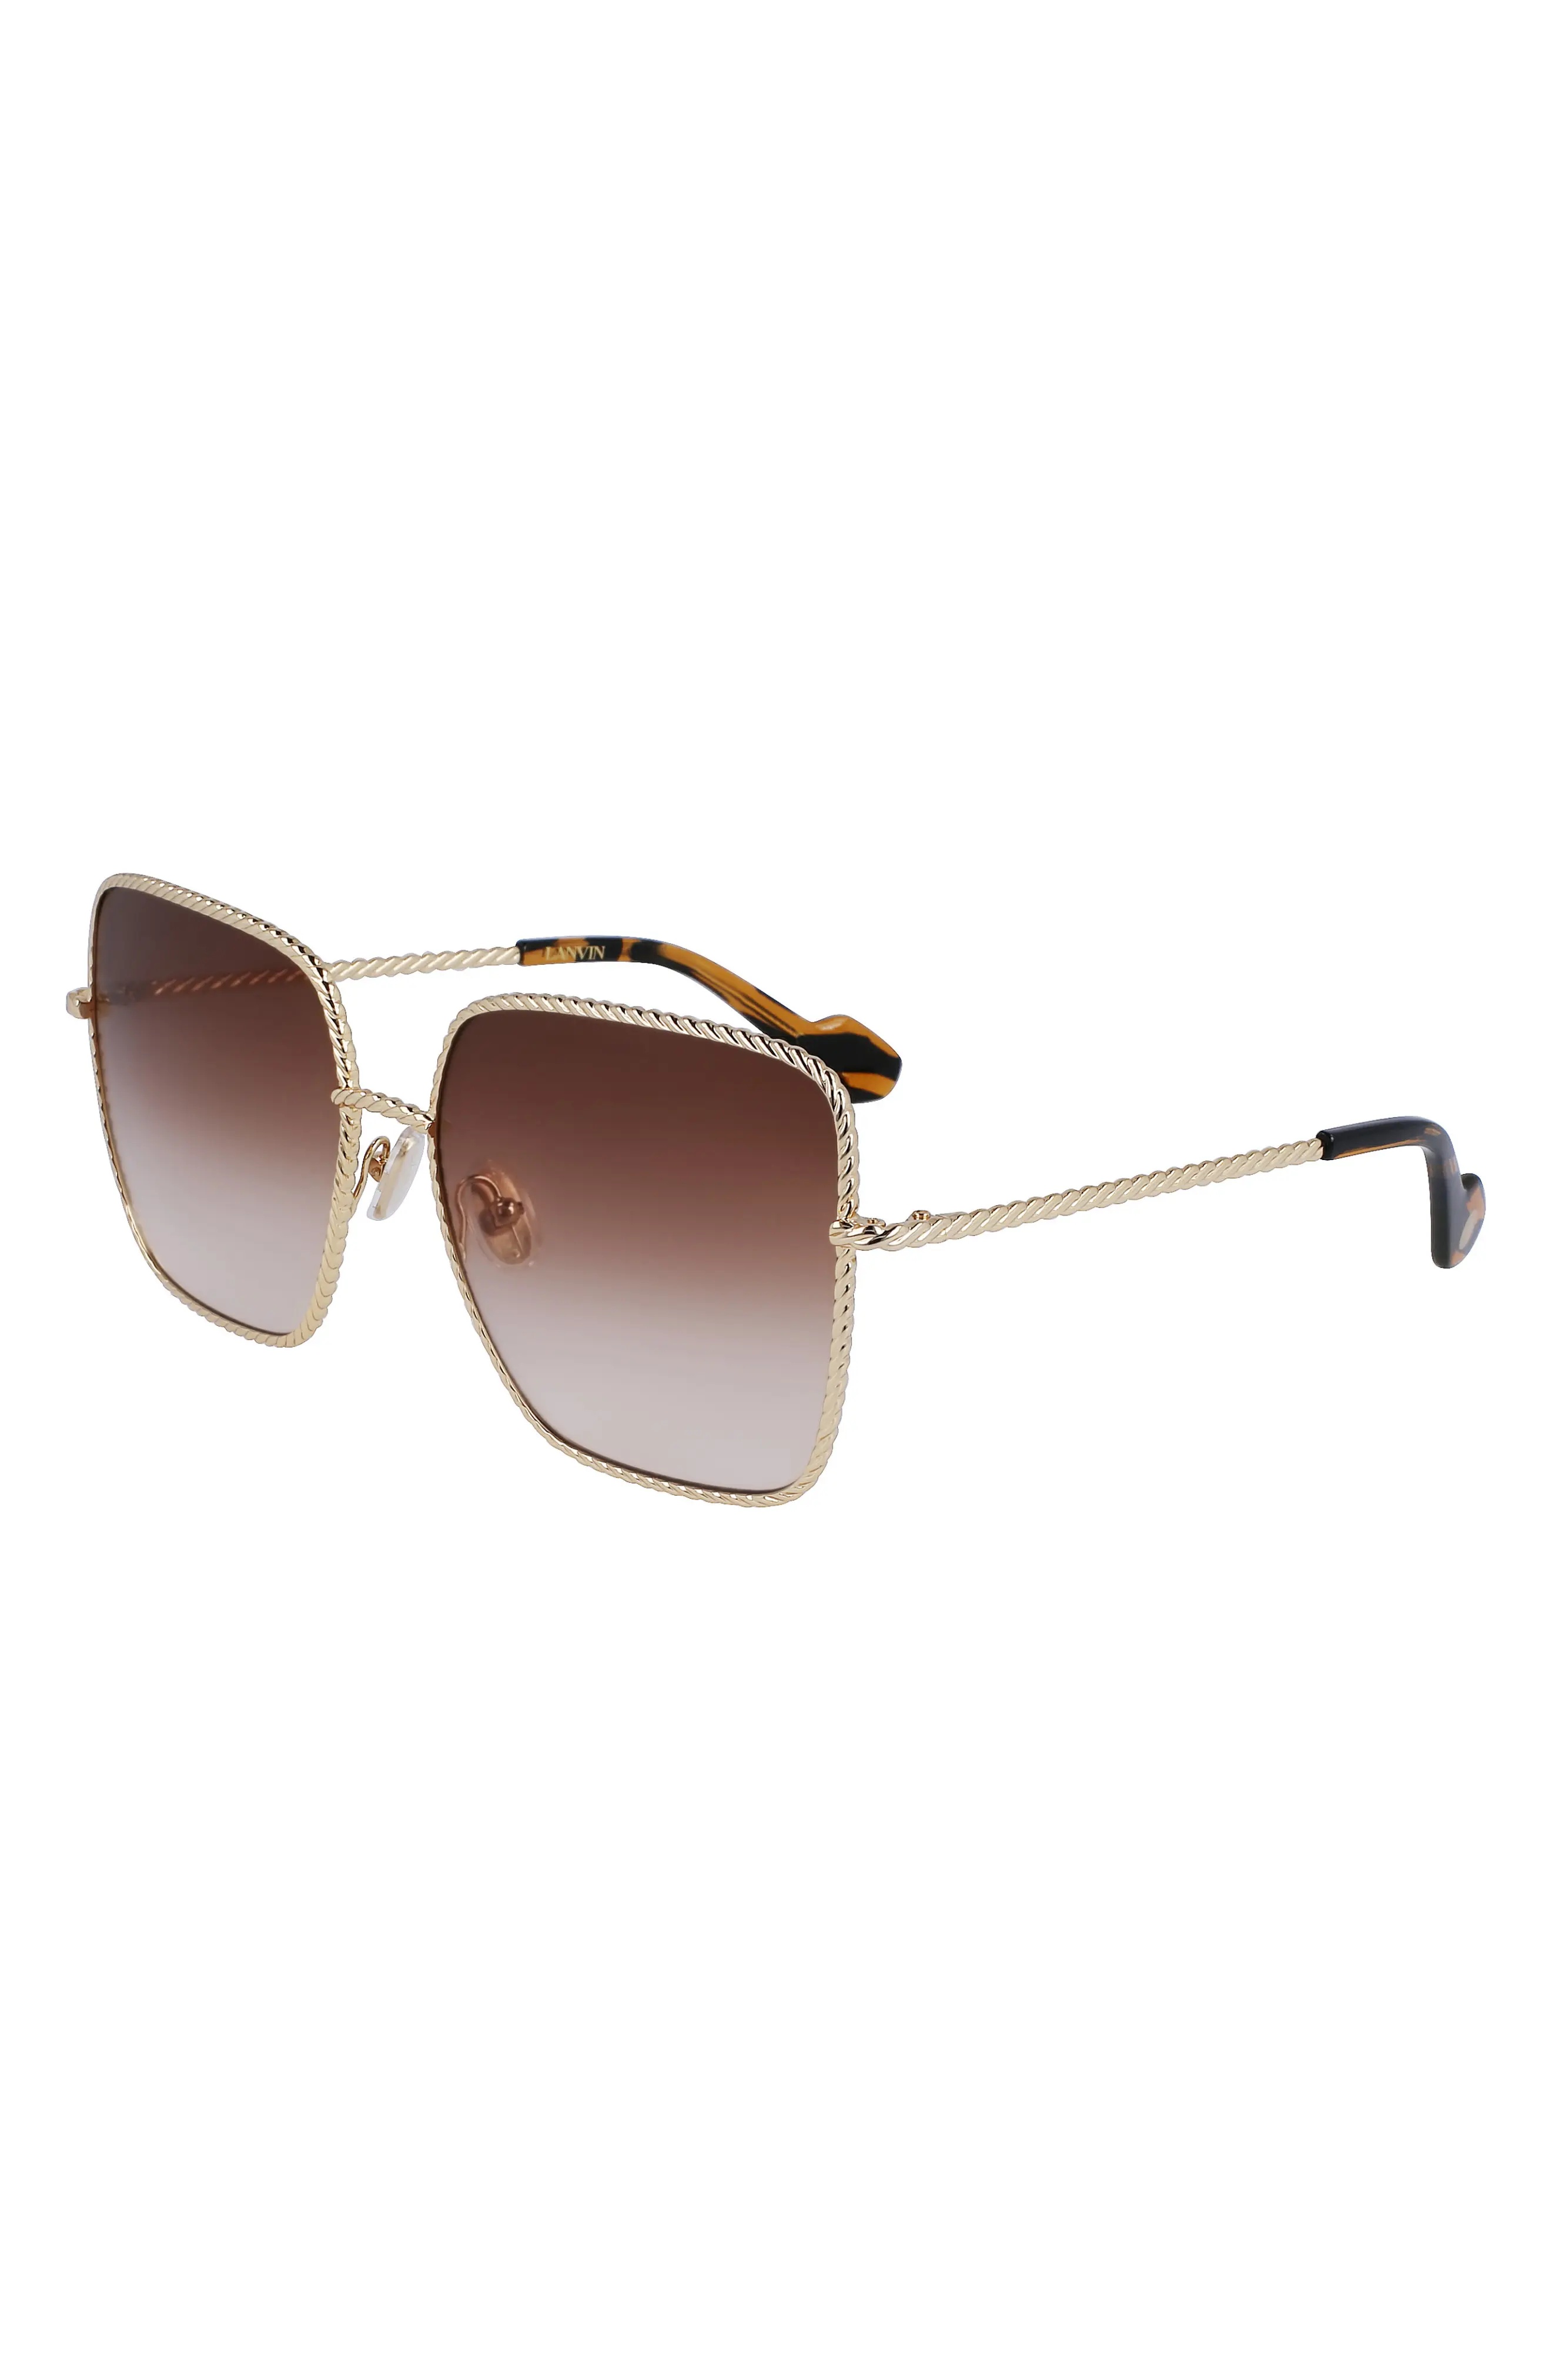 Babe 59mm Gradient Square Sunglasses in Gold/Gradient Brown - 2